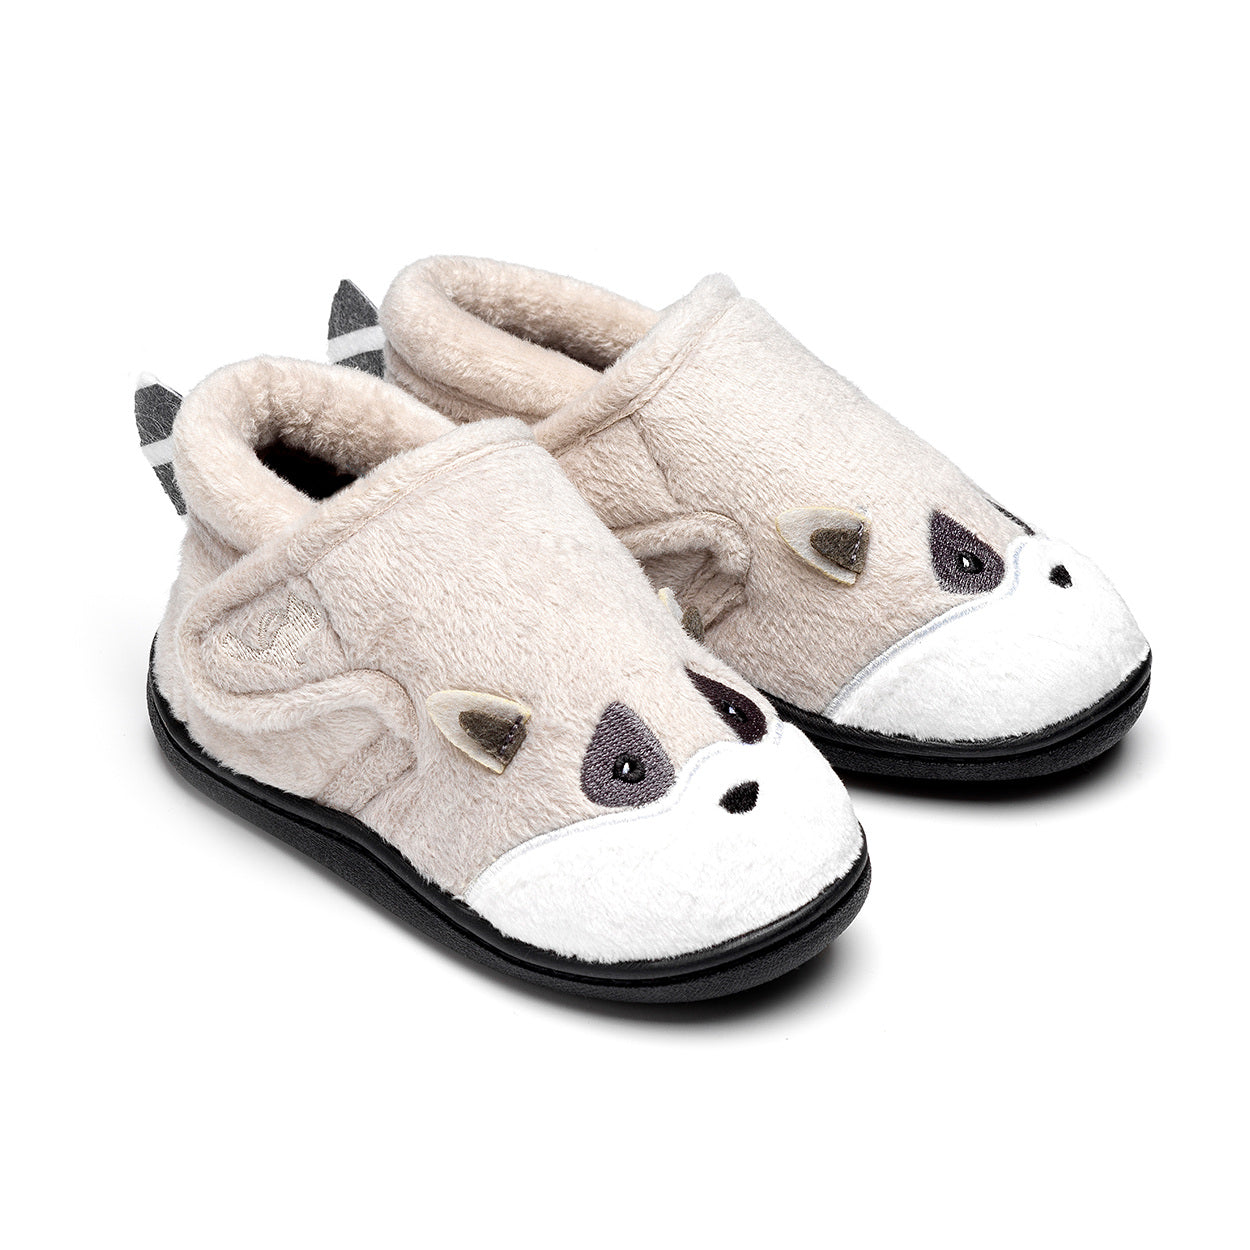 A pair of unisex slippers by Chipmunks, style Rocco Racoon, in grey racoon design with velcro fastening. Angled view of right side.